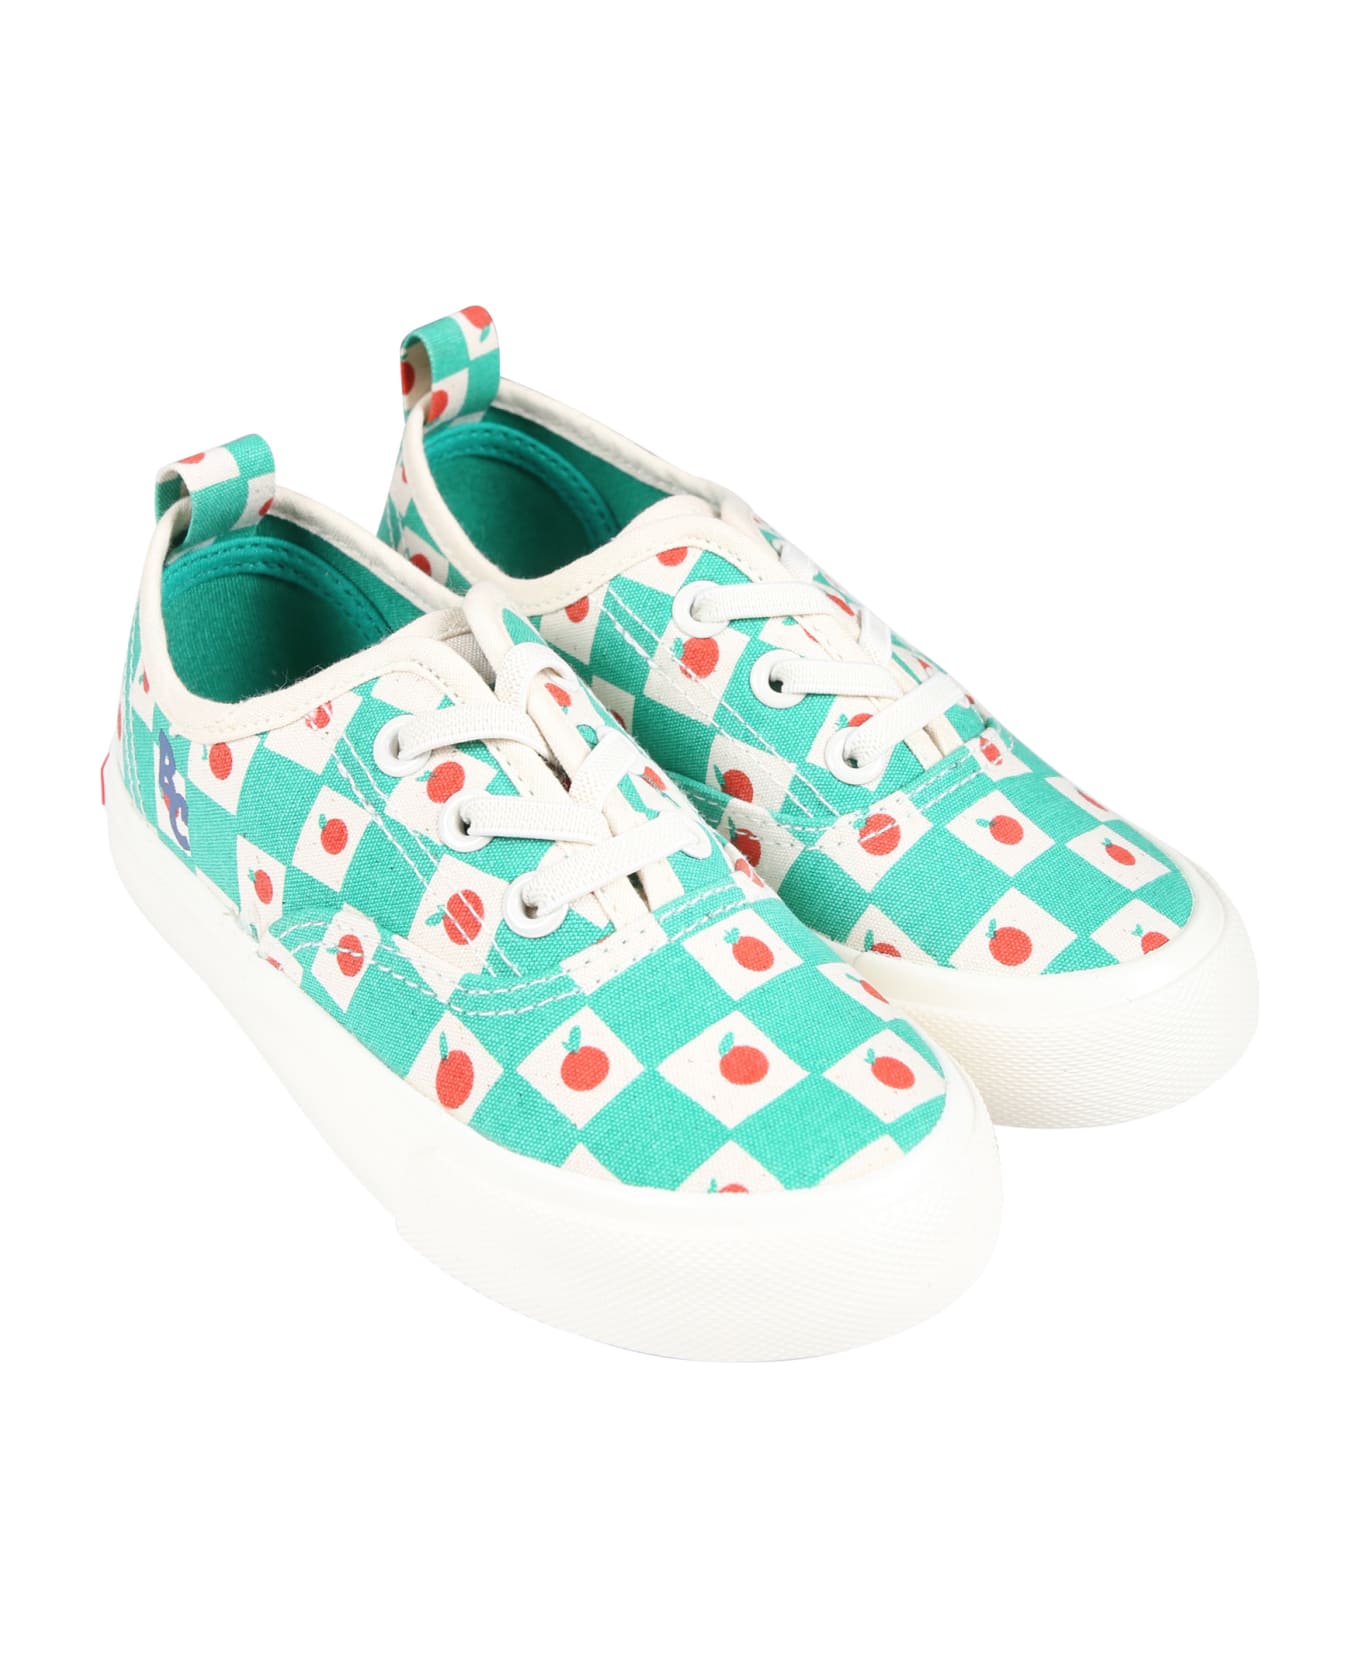 Bobo Choses Green Sneakers For Kids With Tomatoes - Green